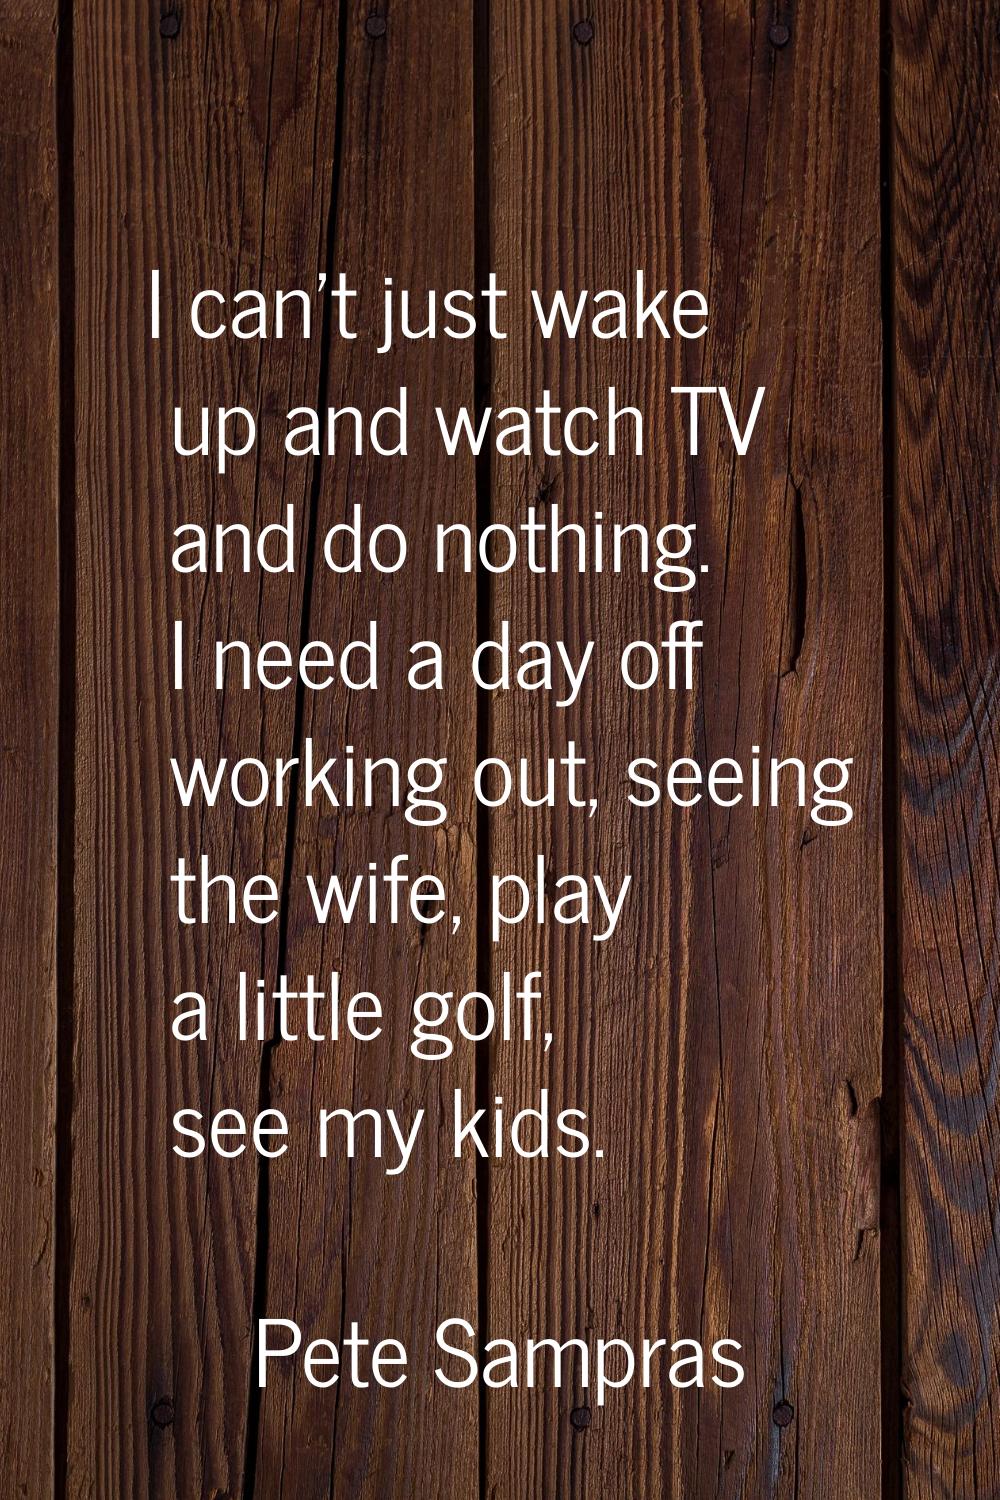 I can't just wake up and watch TV and do nothing. I need a day off working out, seeing the wife, pl